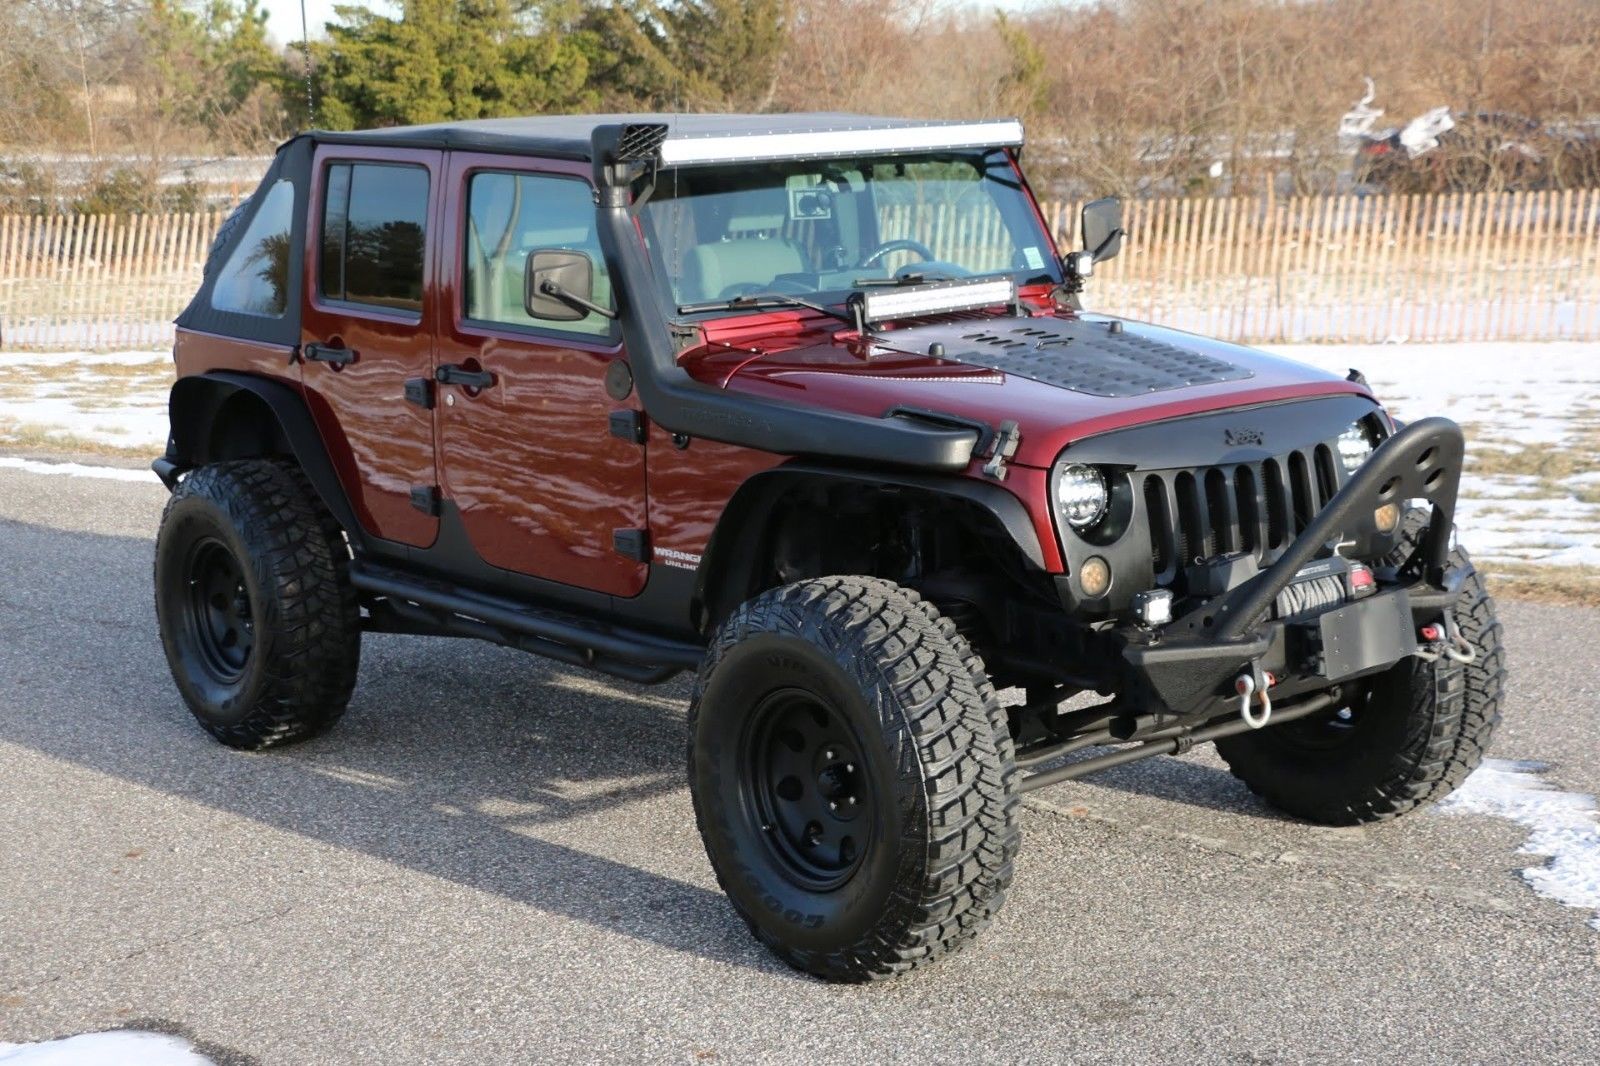 2007 Jeep Wrangler Unlimited Sahara MONSTER Lifted 2007 Jeep Wrangler  Unlimited Sahara For Sale~BIG $$$$ Invested!!! 2022 2023 is in stock and  for sale - Price & Review 2022 2023